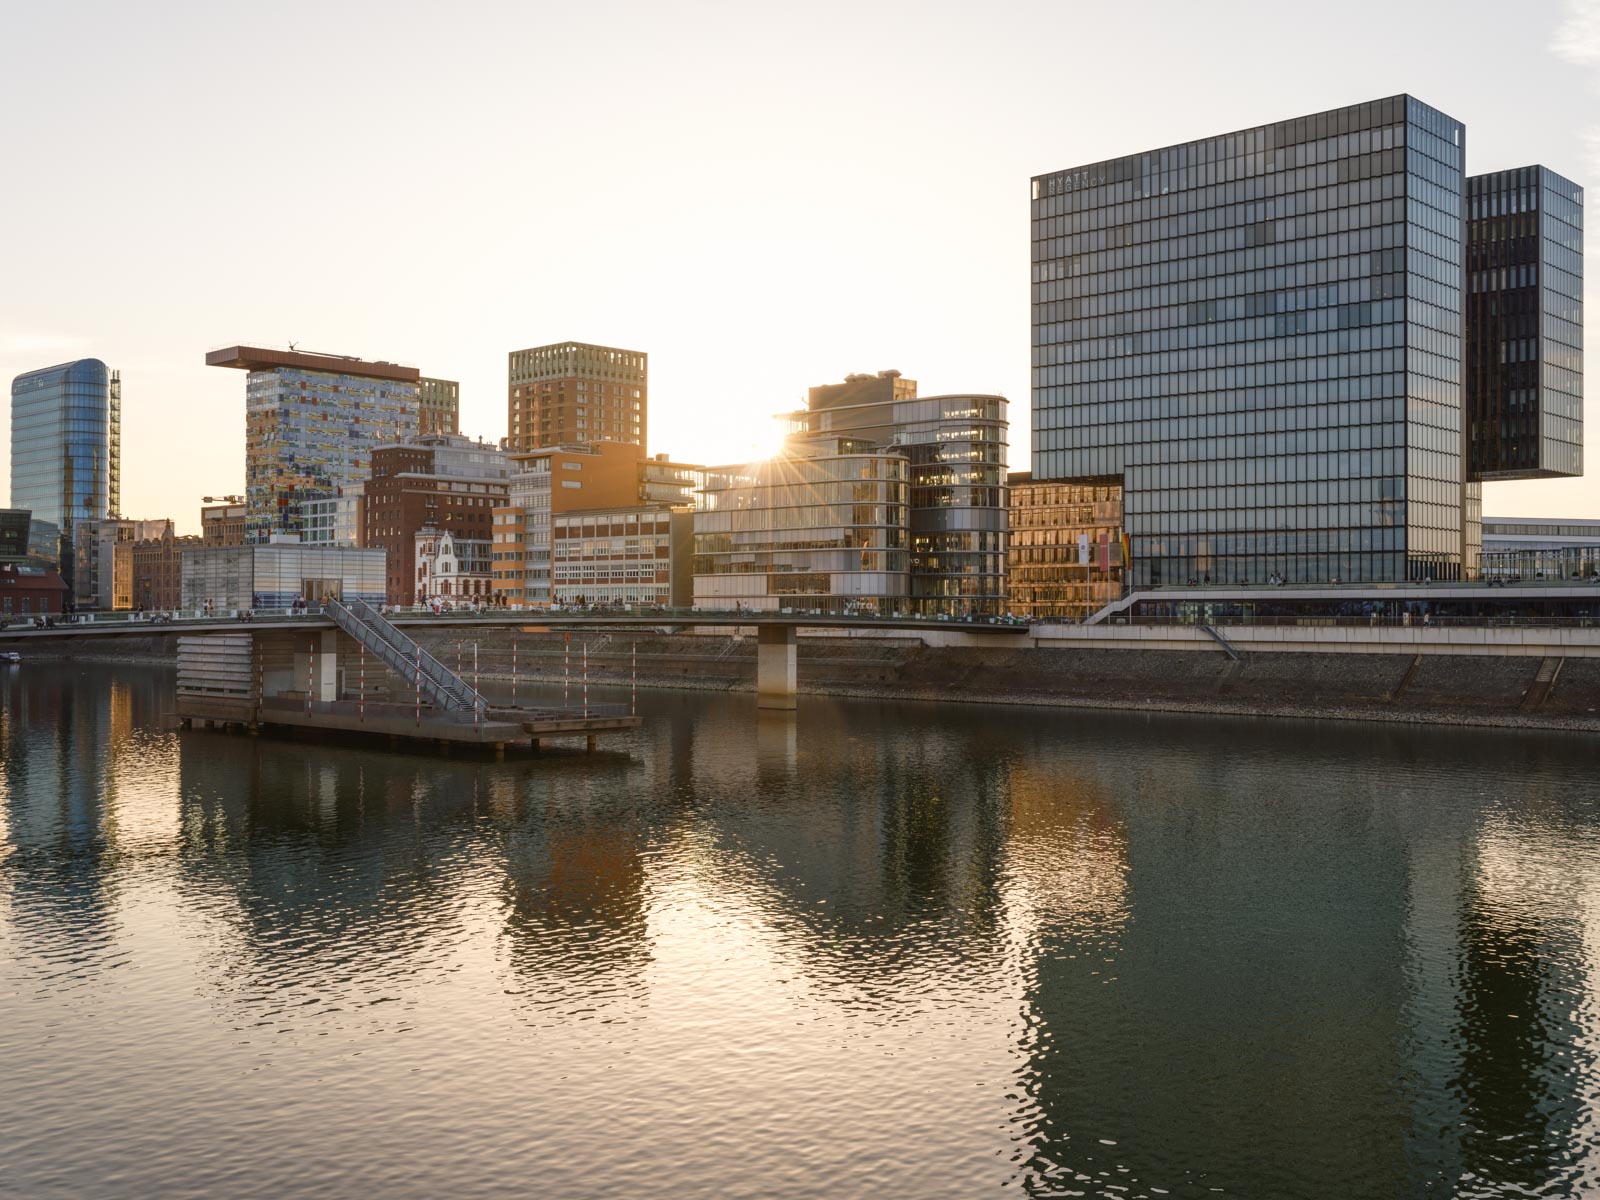 Late afternoon in the 'Medienhafen' (Media Harbour) in Düsseldorf on the Rhine in March 2021 (Germany).